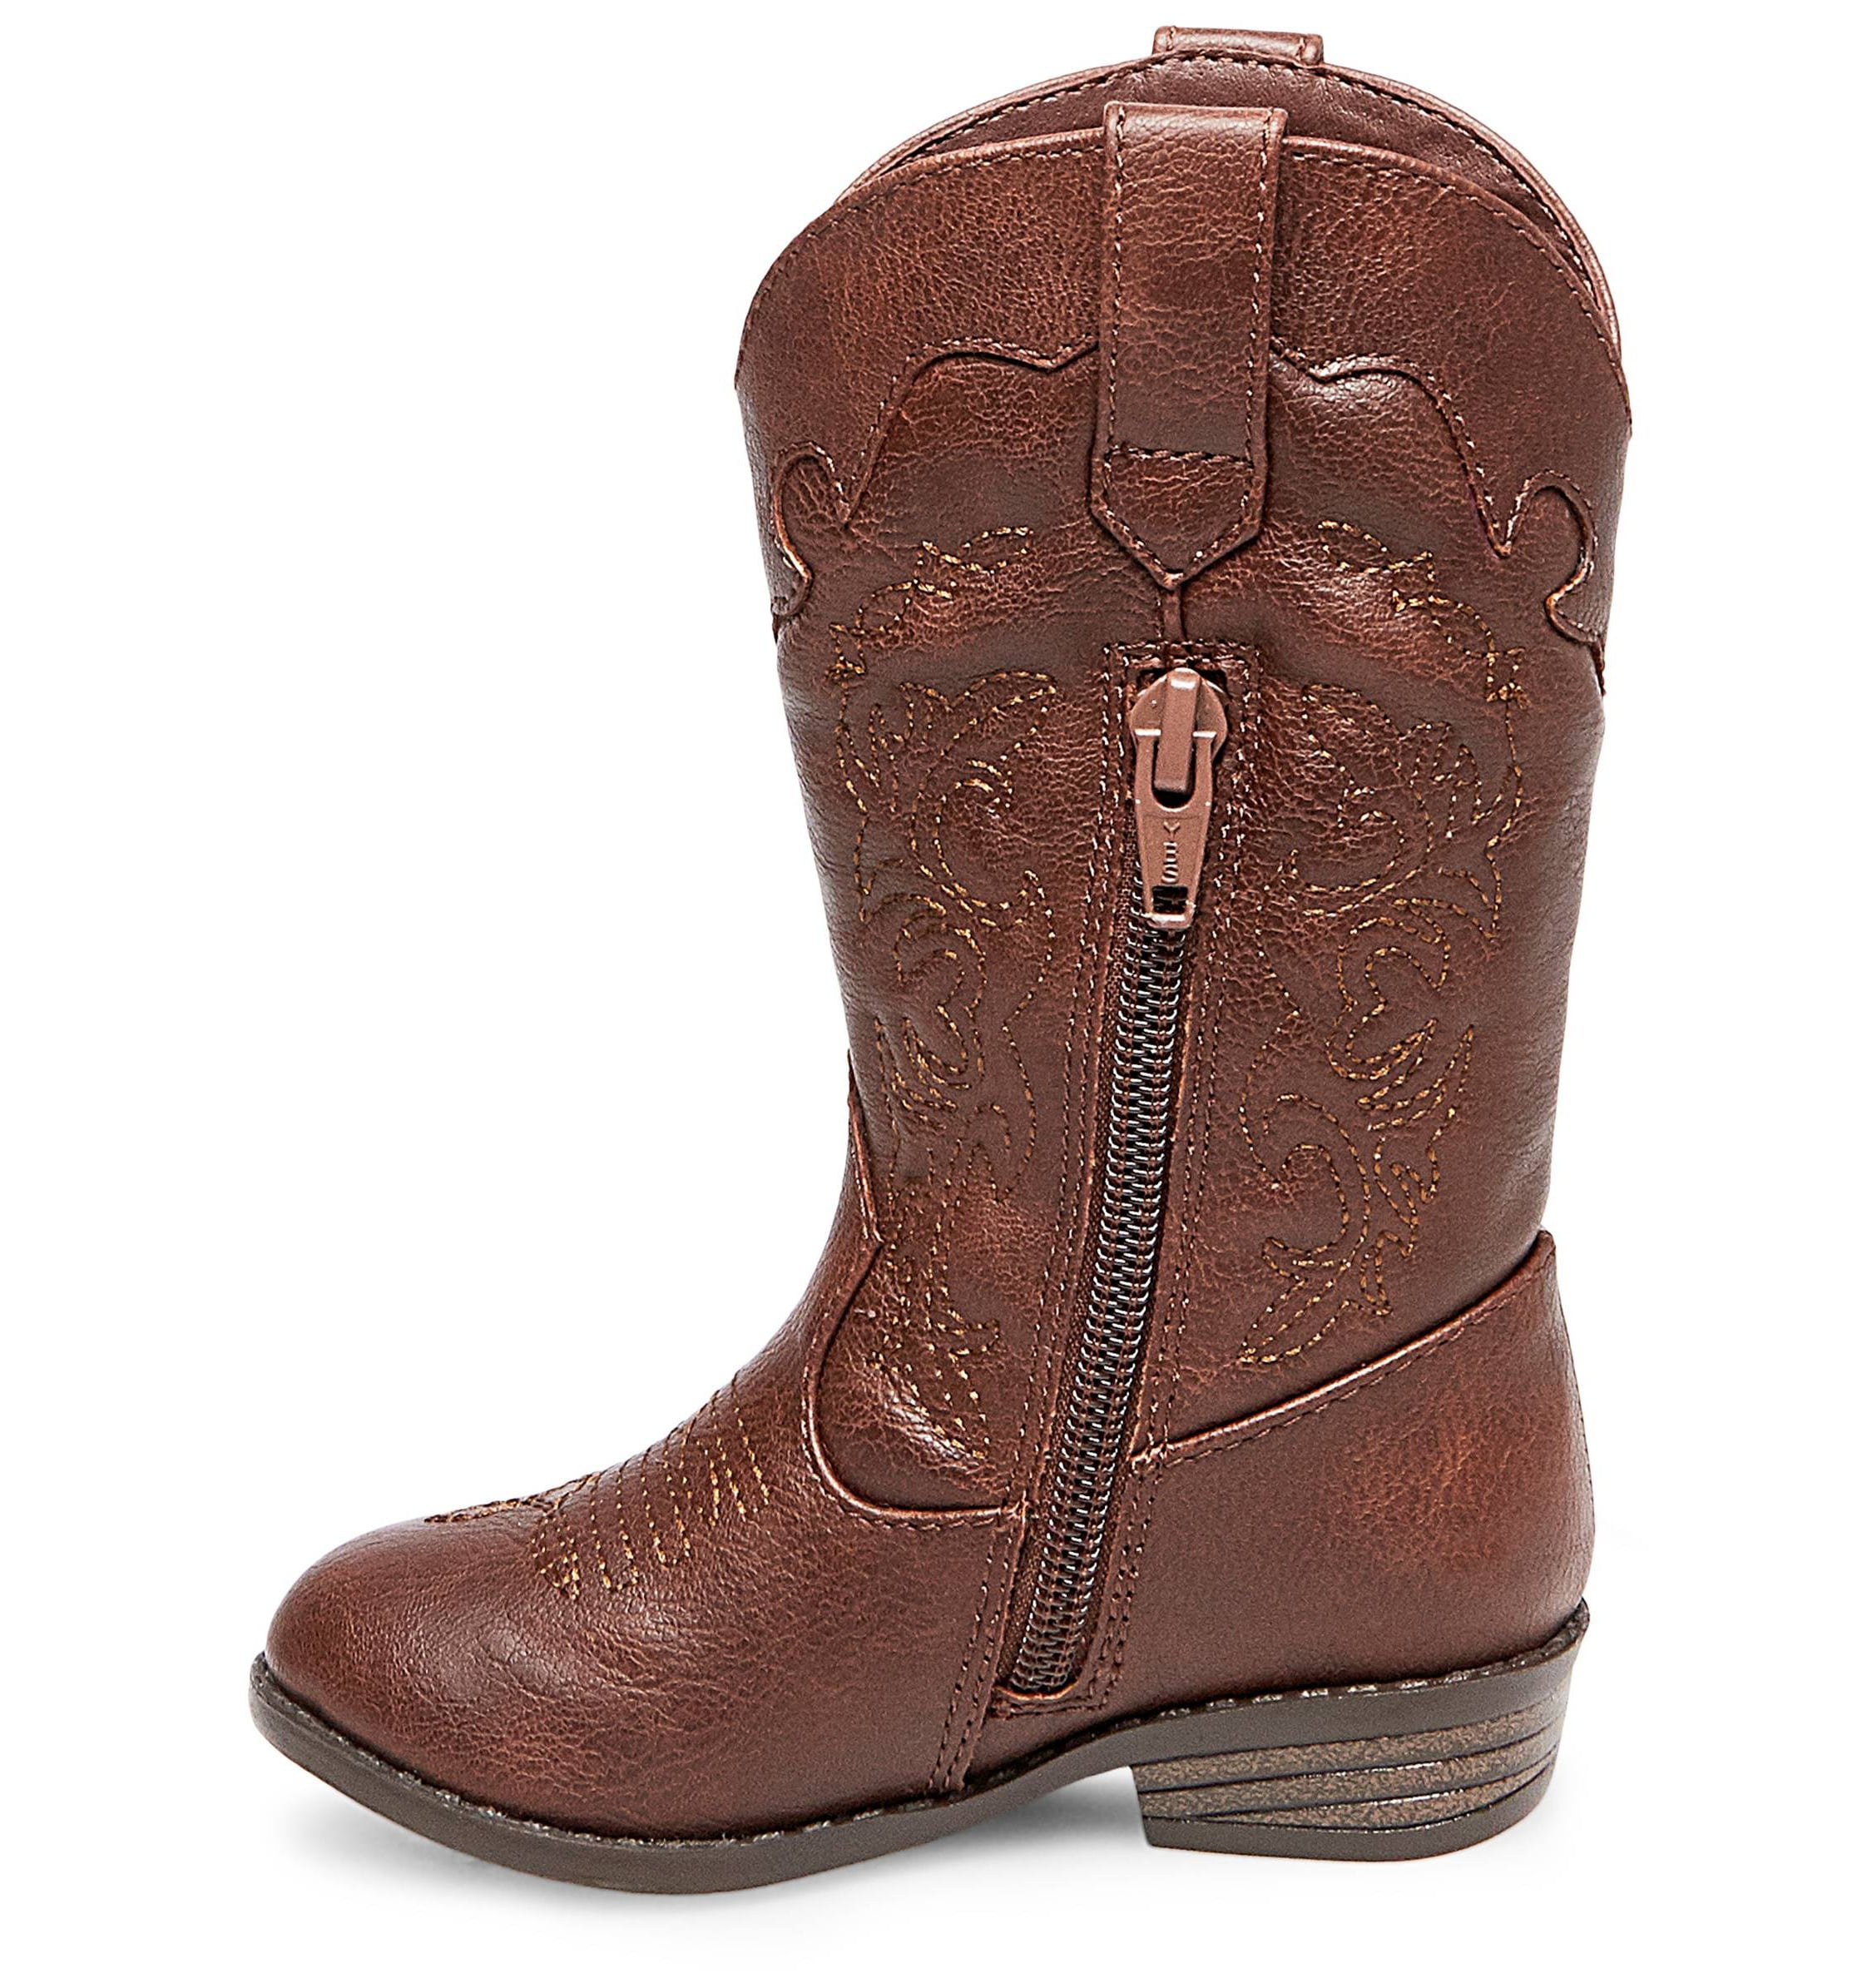 Toddler Girls' Mahogany Western Boot Cat & Jack Brown Sizes:6 